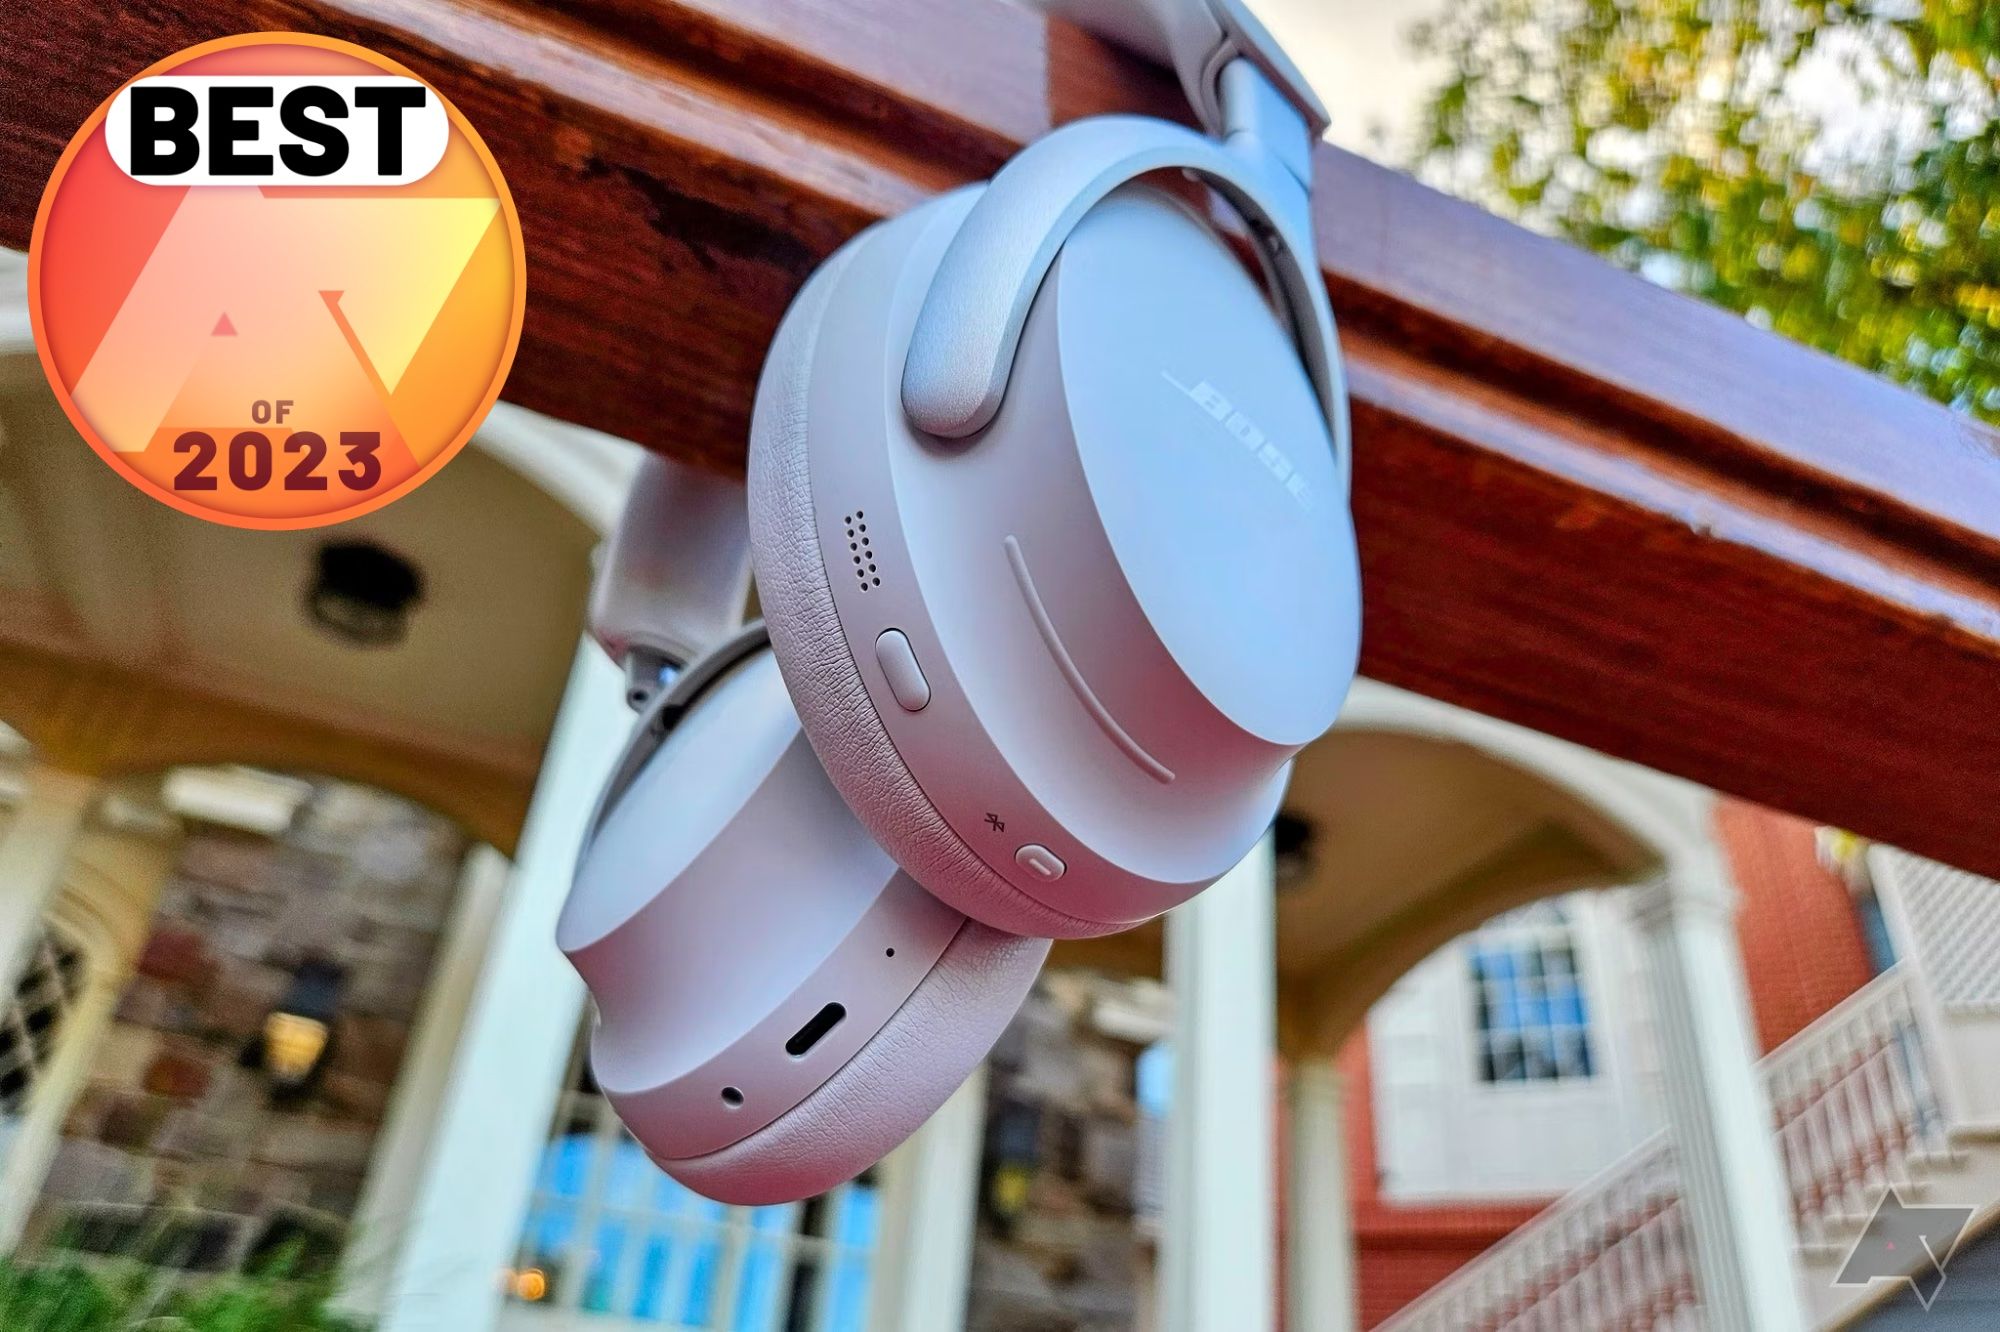 The Bose QuietComfort Ultra headphones hanging on handrail with a Best of 2023 Android Police badge in the top left corner